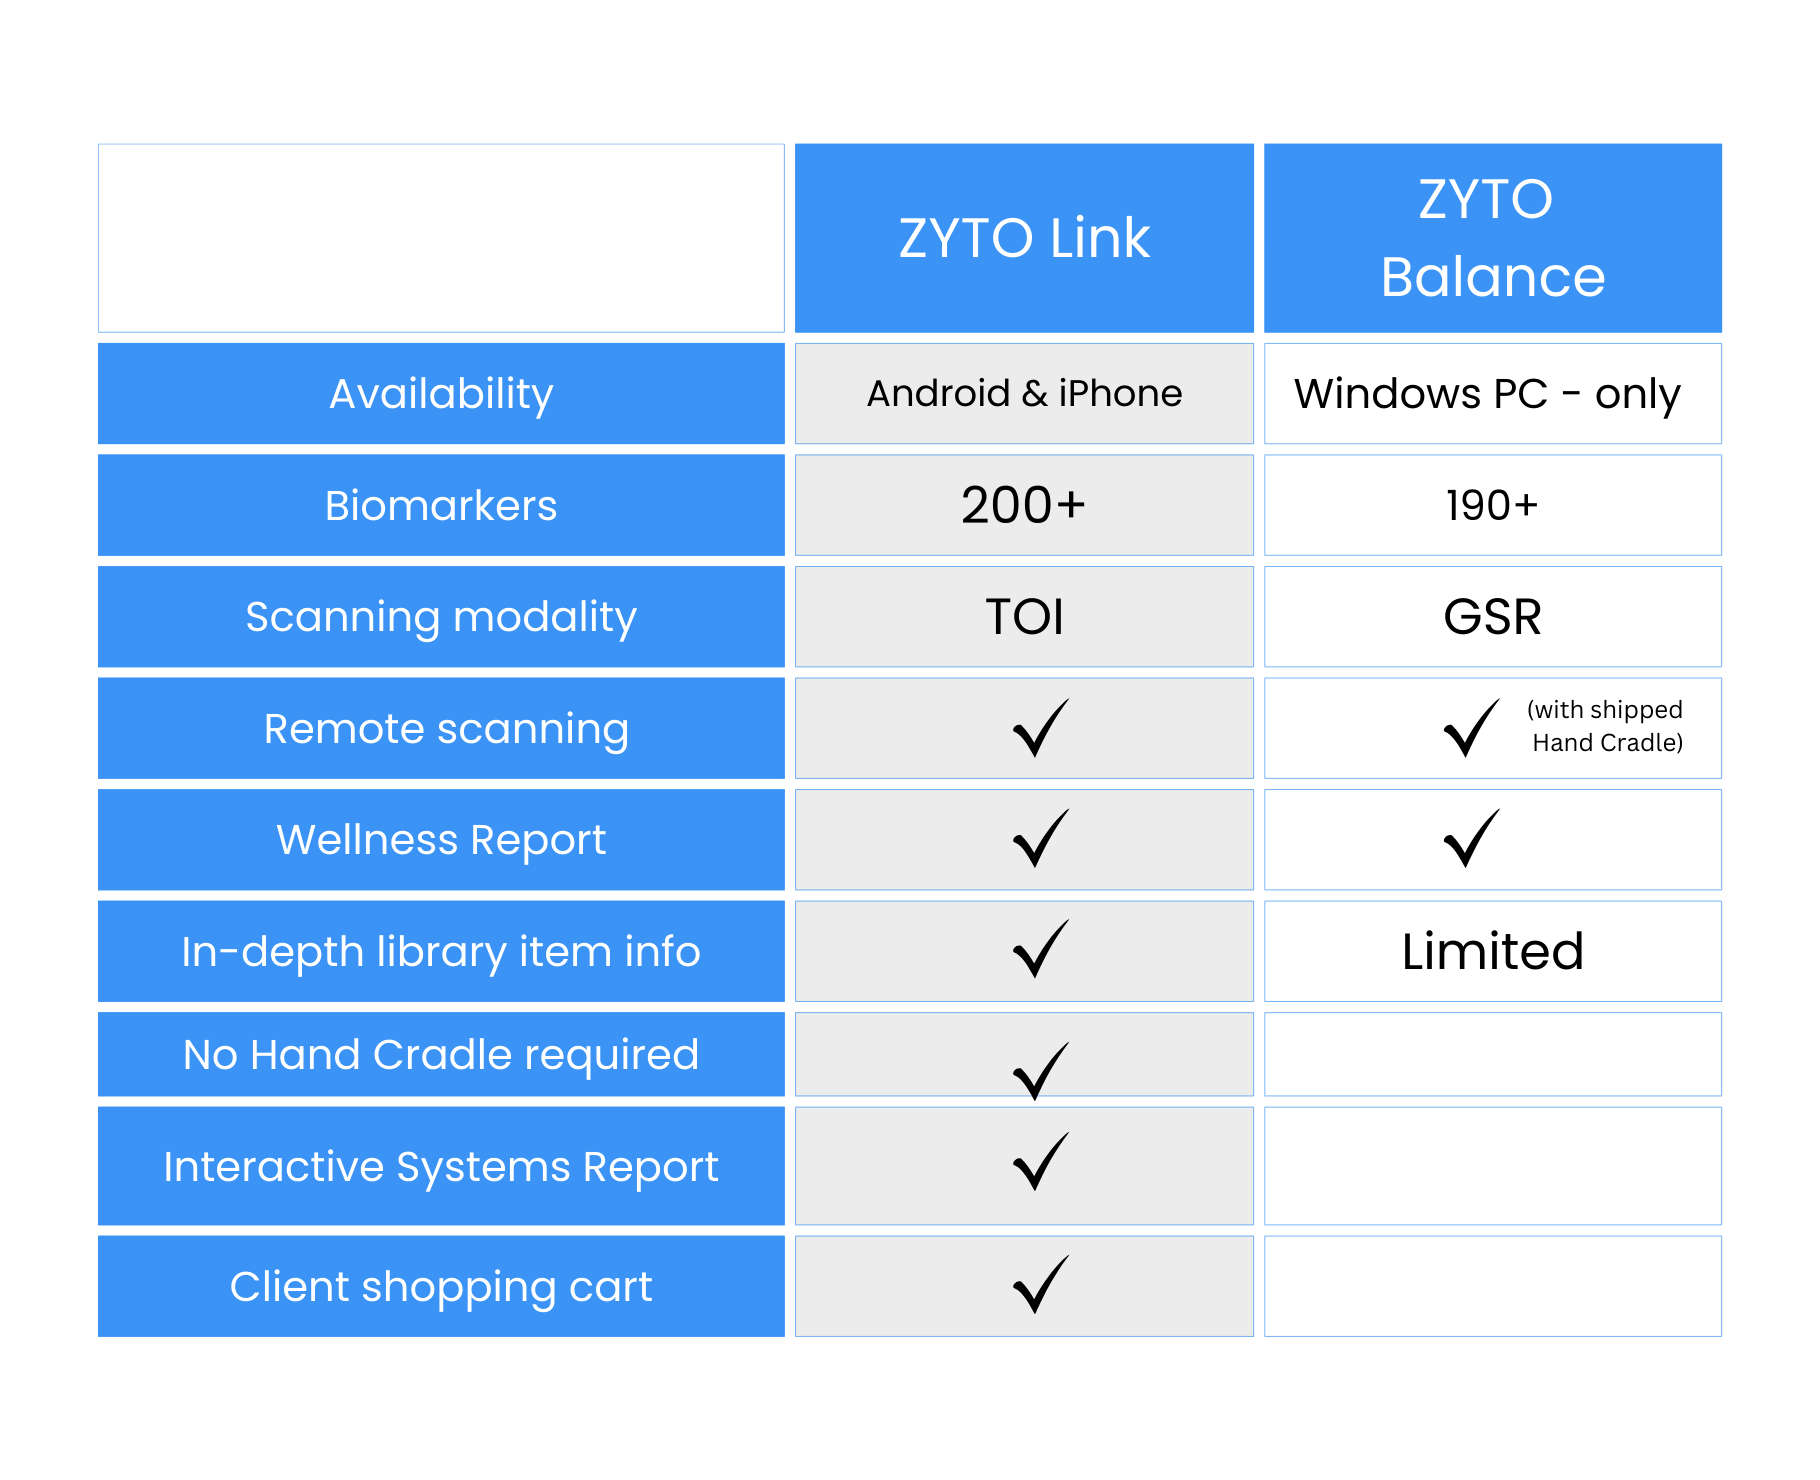 zyto product comparison - balance and link